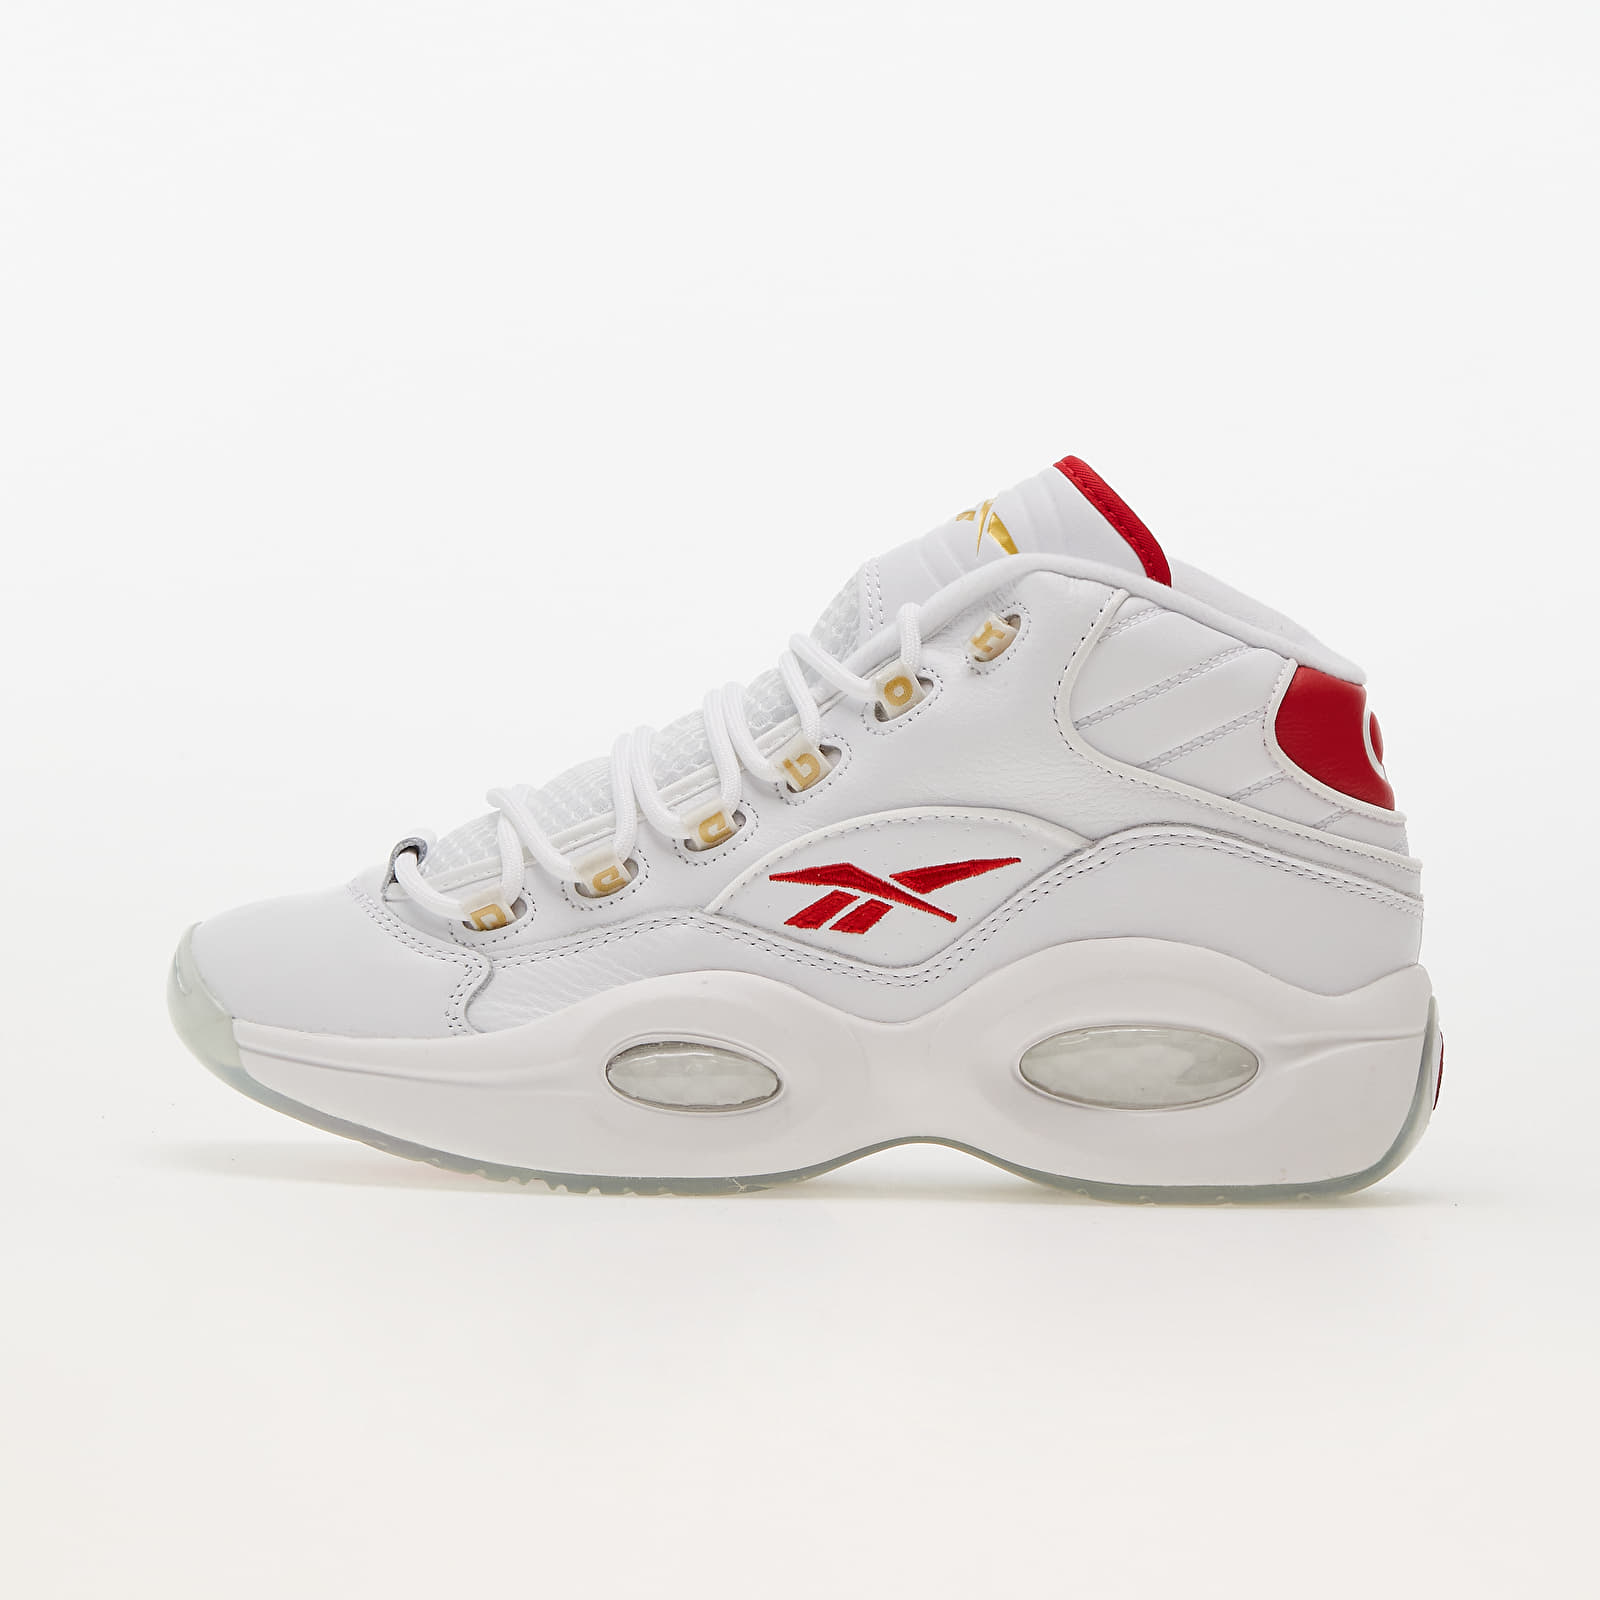 Buty męskie Reebok Question Mid Ftw White/ Ftw White/ Vector Red